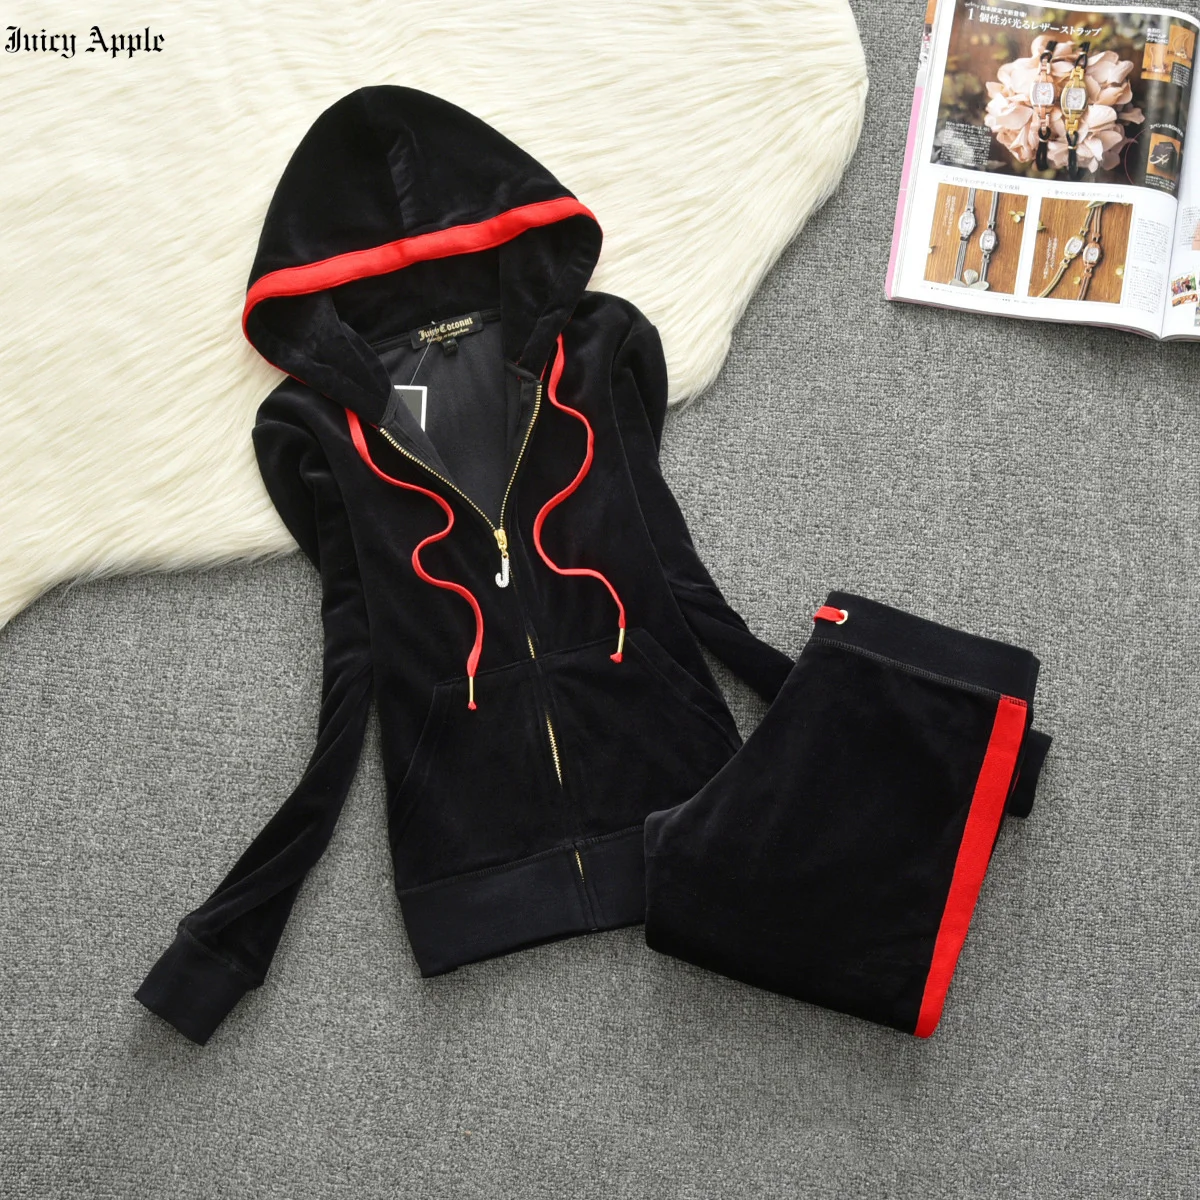 Juicy Apple Tracksuit Womens Two Piece Set 2022 Autumn Winter Sports And Casual Suit Fashion Hooded Tops Long-sleeved Trousers